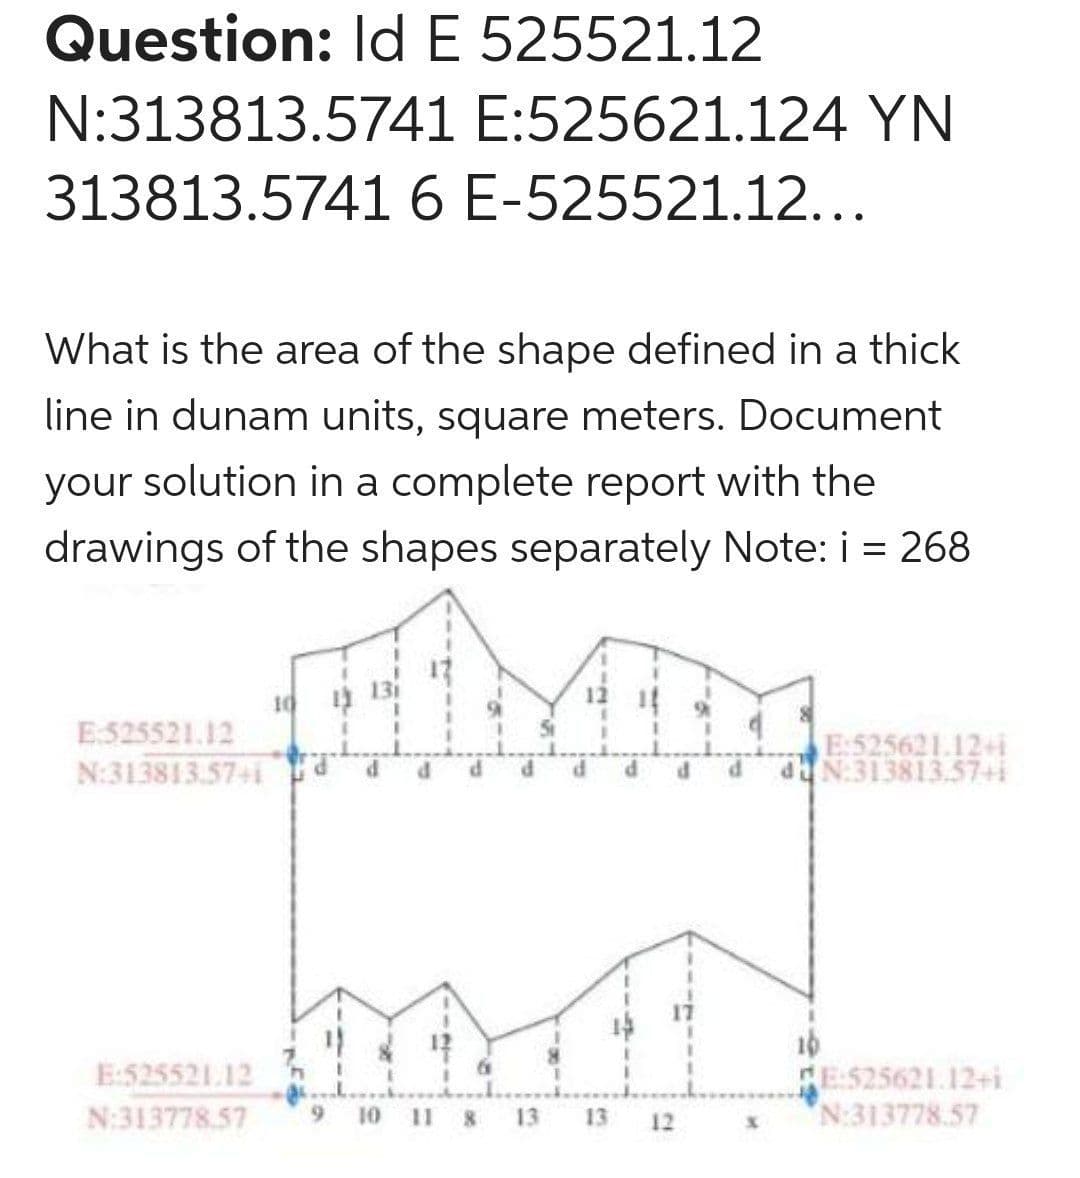 Question: IdE 525521.12
N:313813.5741 E:525621.124 YN
313813.5741 6 E-525521.12...
What is the area of the shape defined in a thick
line in dunam units, square meters. Document
your solution in a complete report with the
drawings of the shapes separately Note: i = 268
10
E525521.12
N:313813.57+i
E:525621.12+i
N:313813.57+i
16
E525621.12+i
N:313778.57
E:525521.12
N:313778.57
6.
10 11 8
13
13
12
